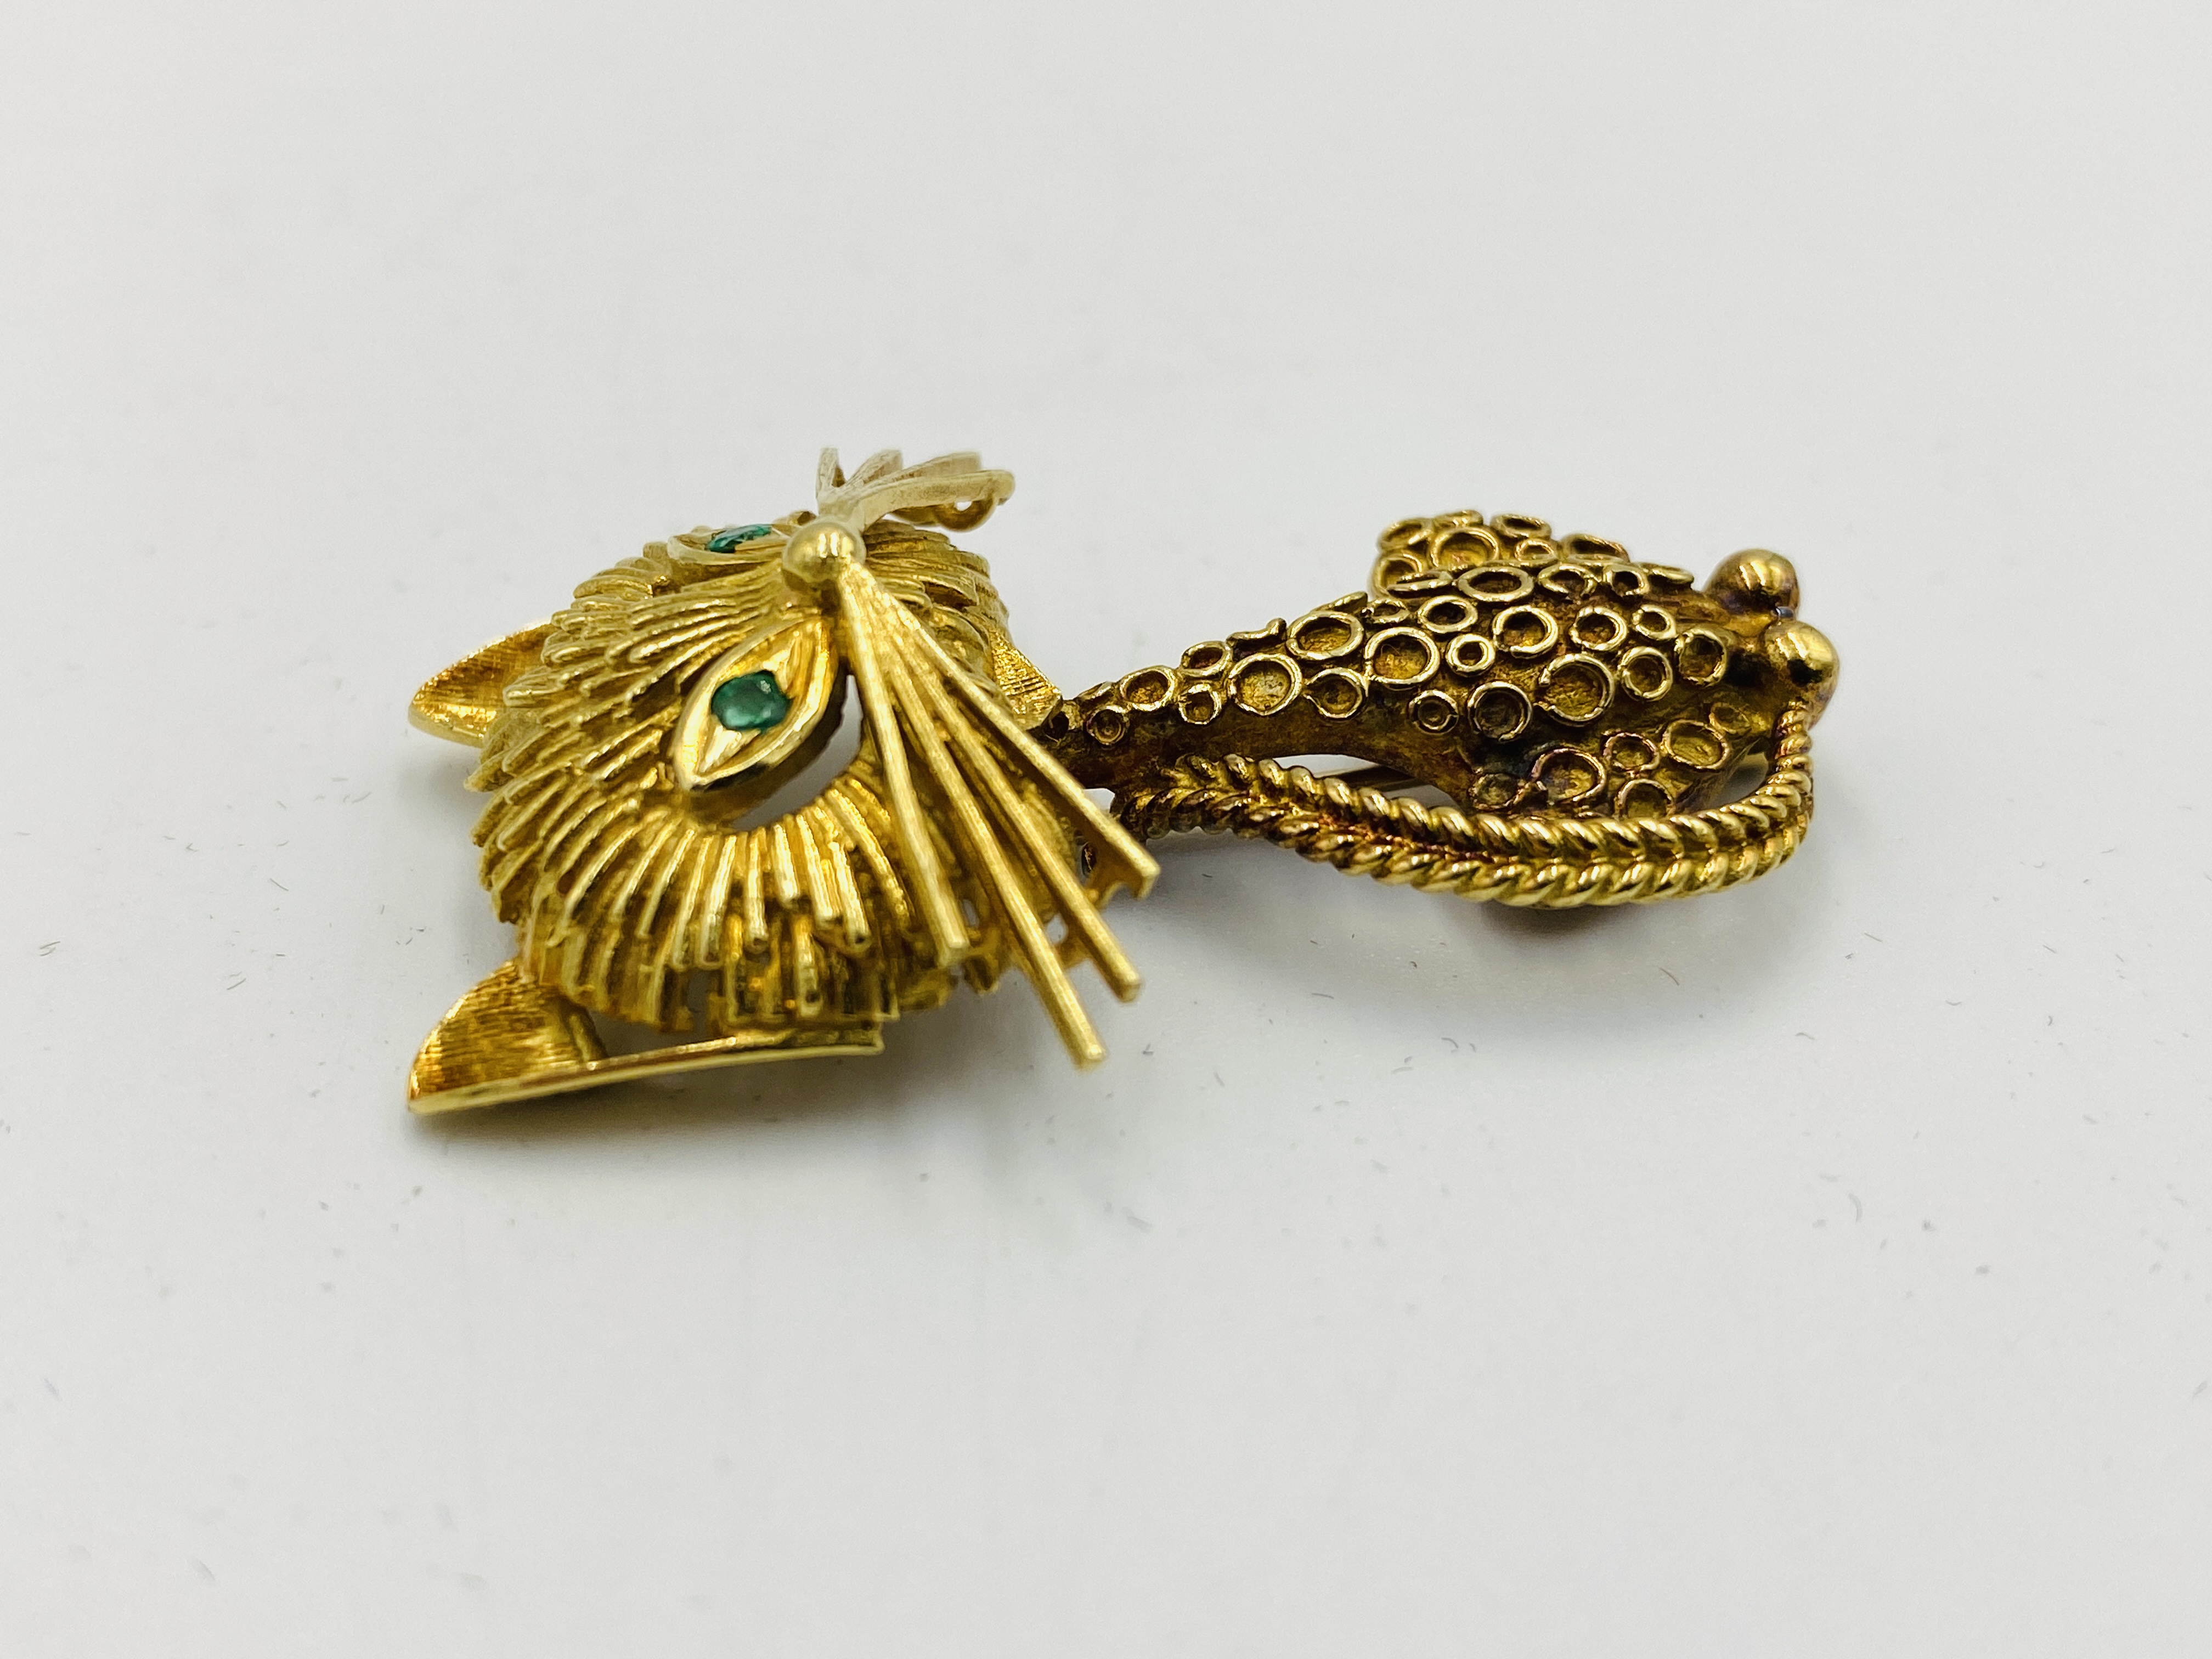 18ct gold Garrards cat brooch set with emerald eyes - Image 3 of 6